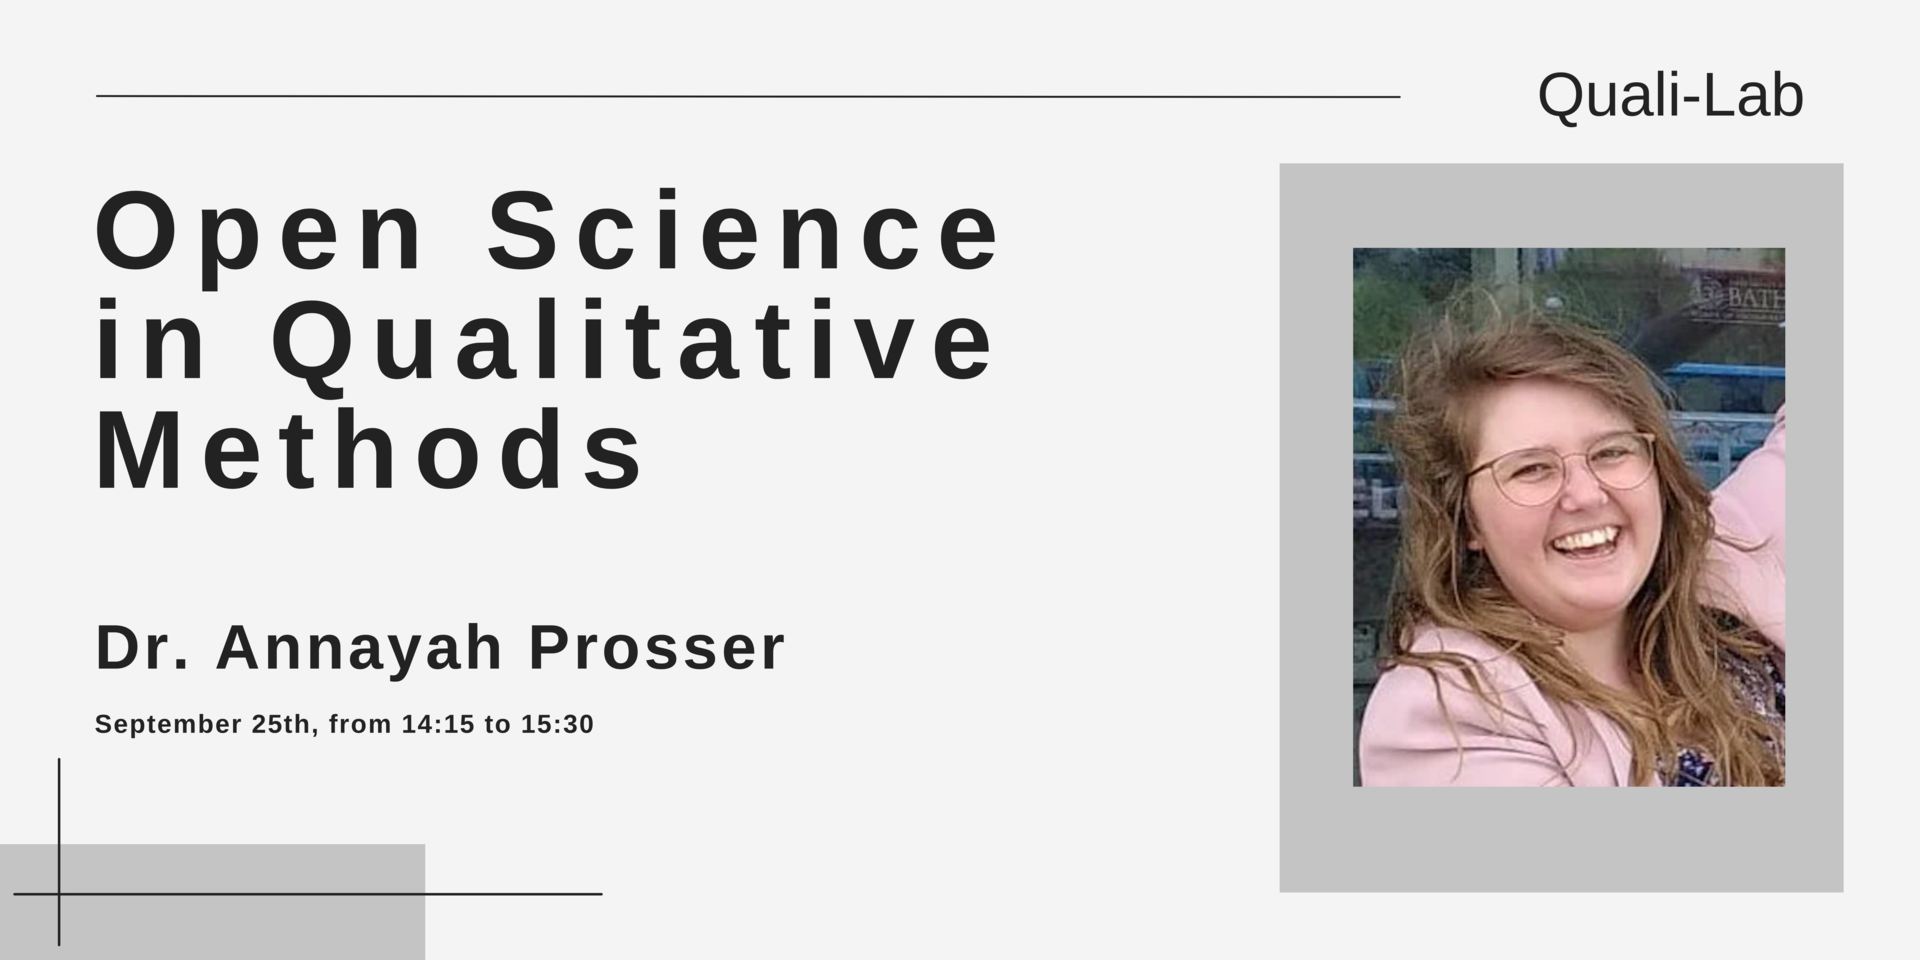 Poster for the seminar, with a picture of a smiling woman (Dr. Annayah Prosser). Text: Open Science in Qualitative Methods. Dr Annayah Prosser. September 25h, from 14:15 to 15:30.